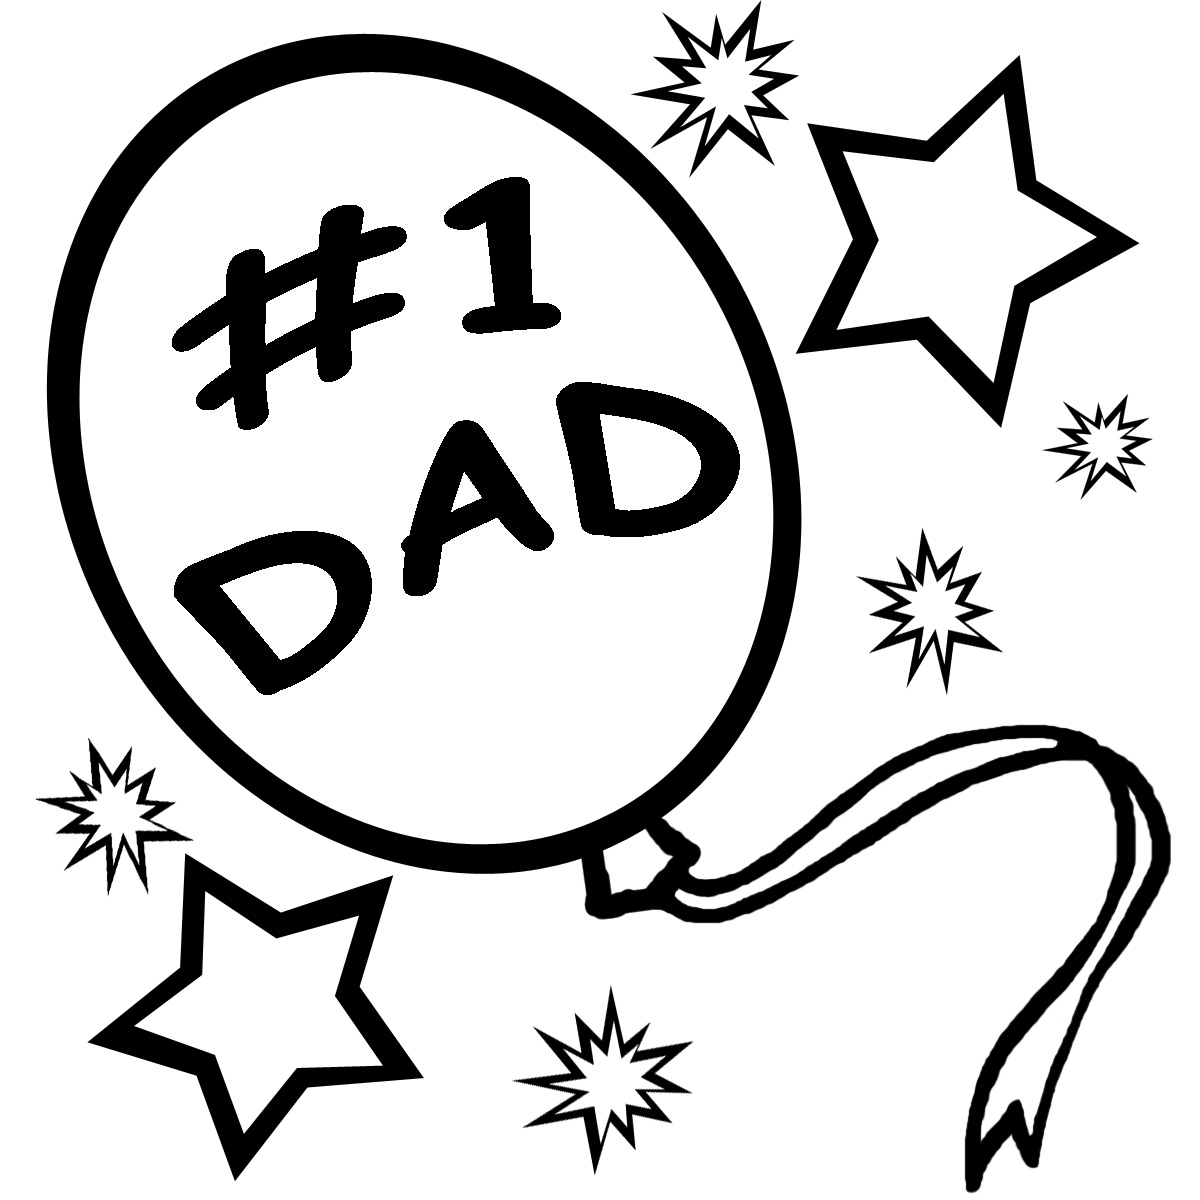 Fathers day free father clip art clipart image 2